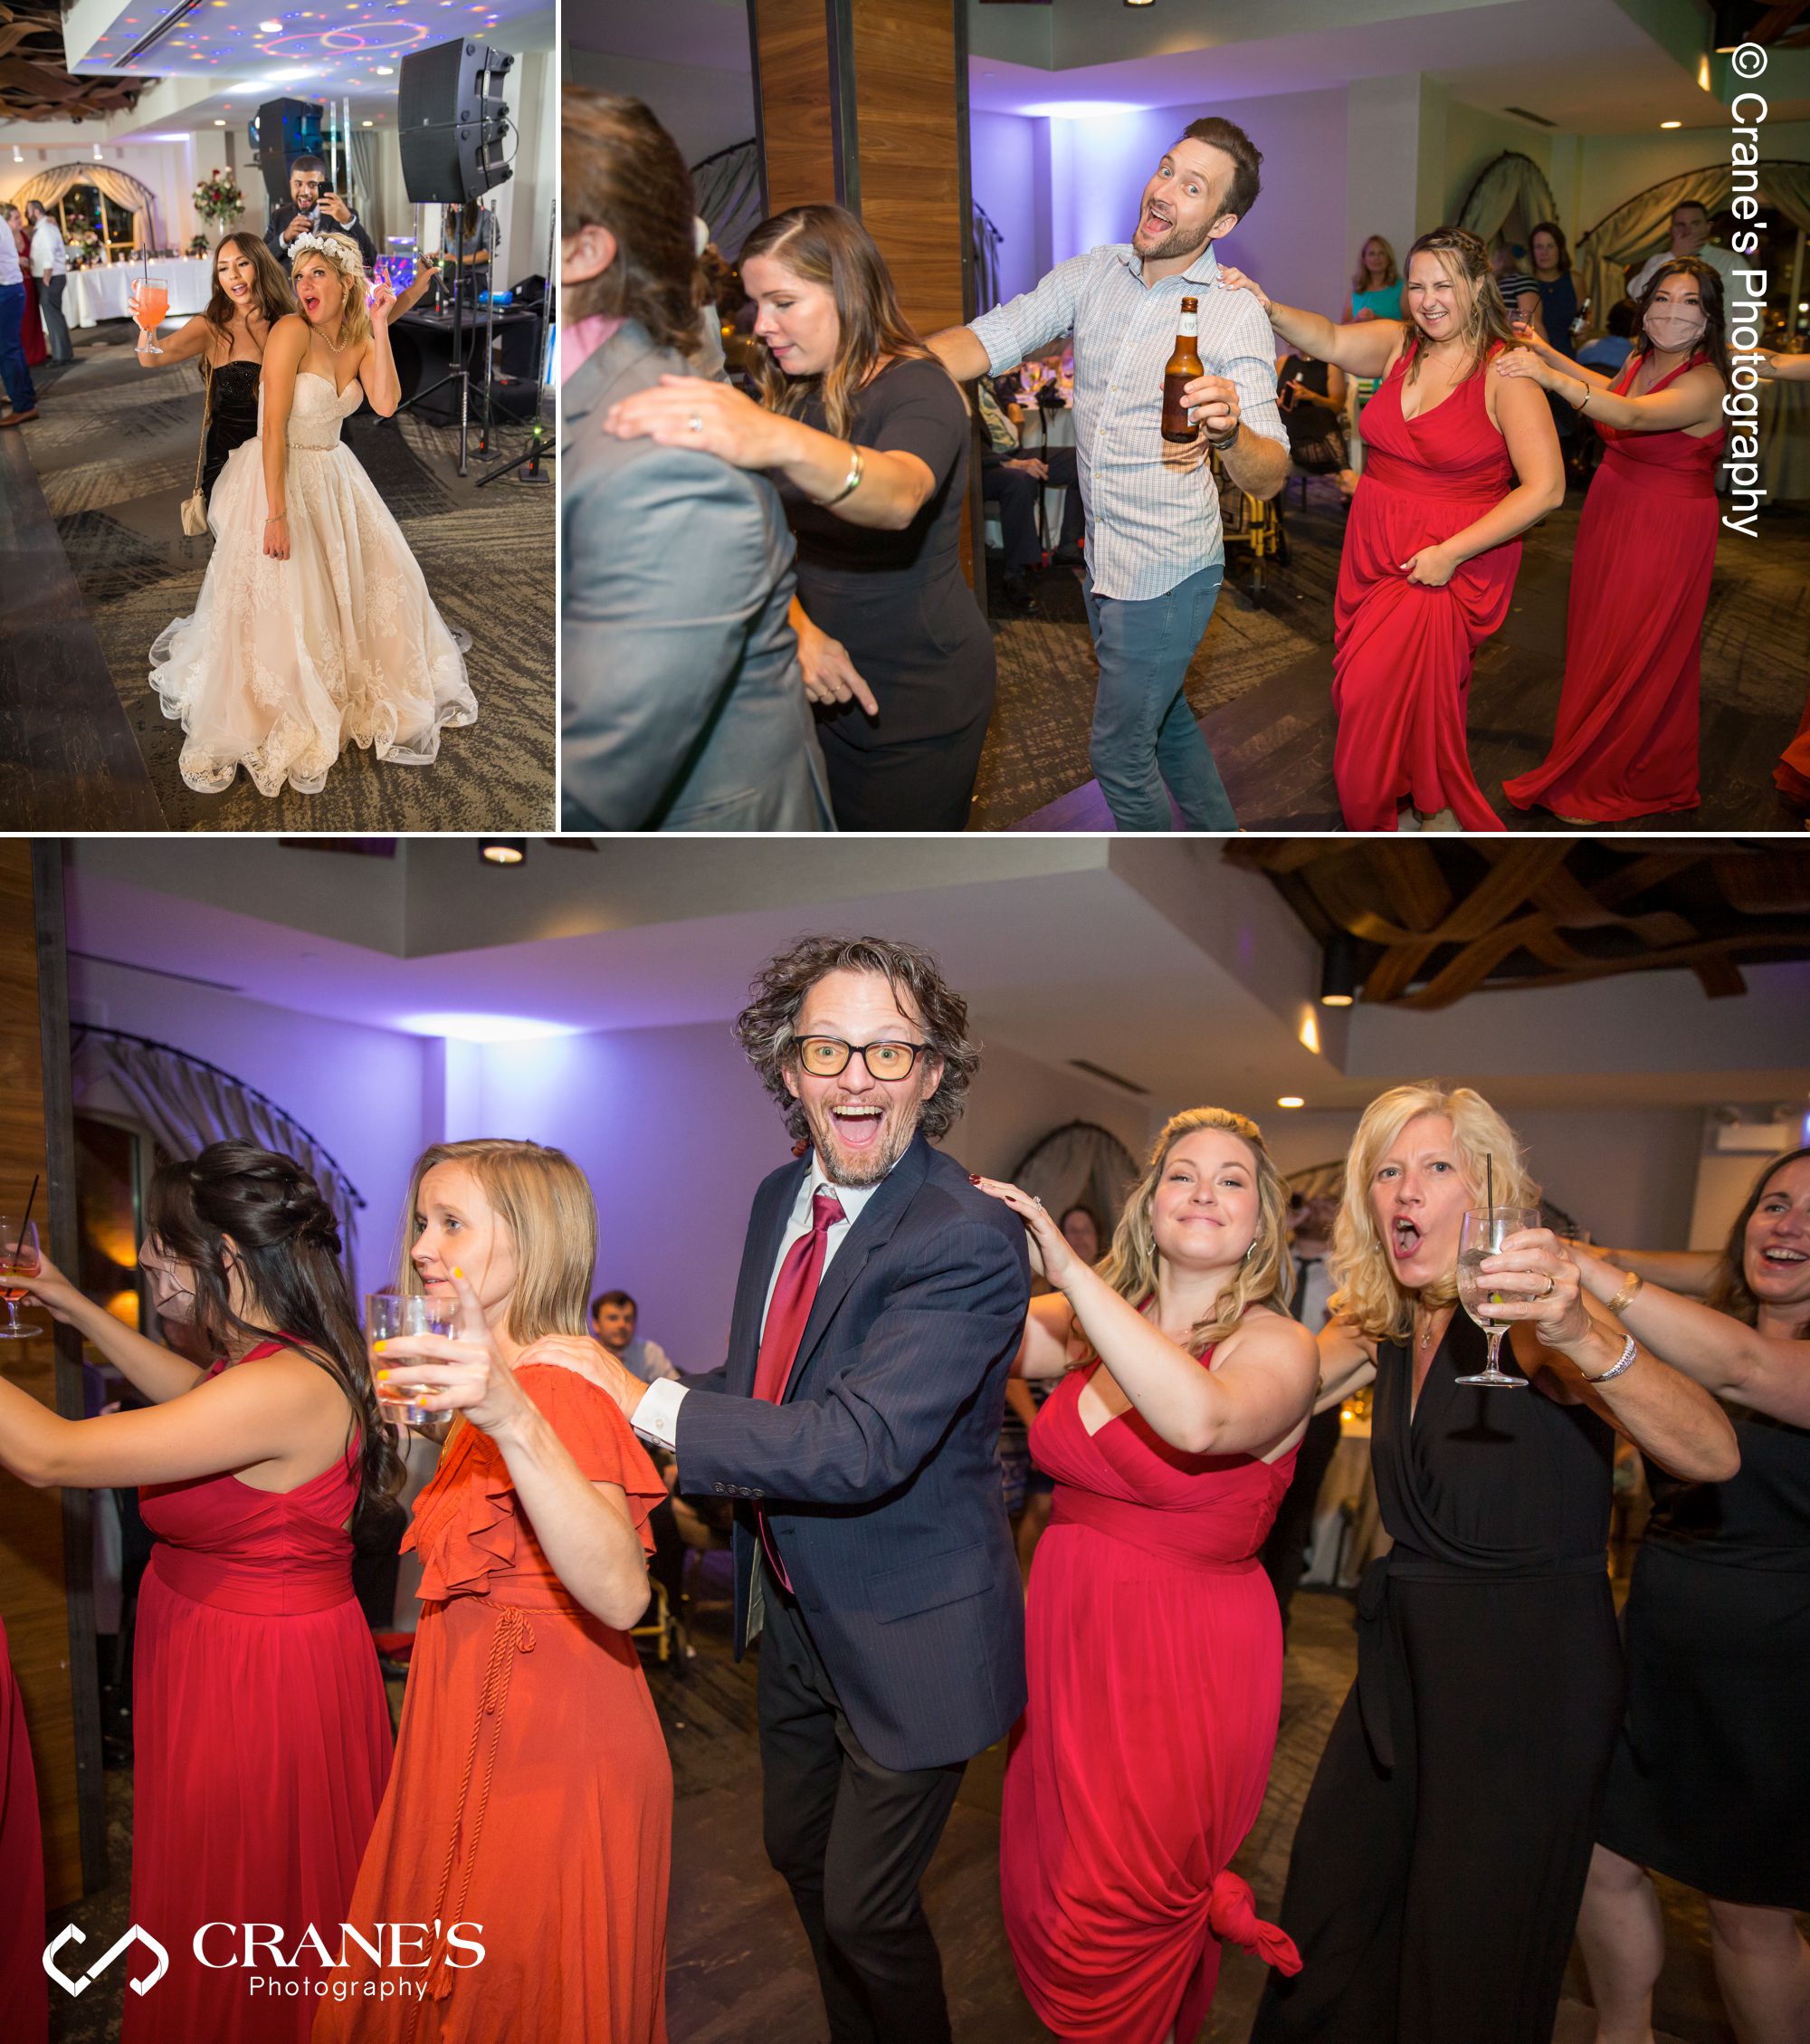 Wedding celebration at Elements at Water Street in Naperville